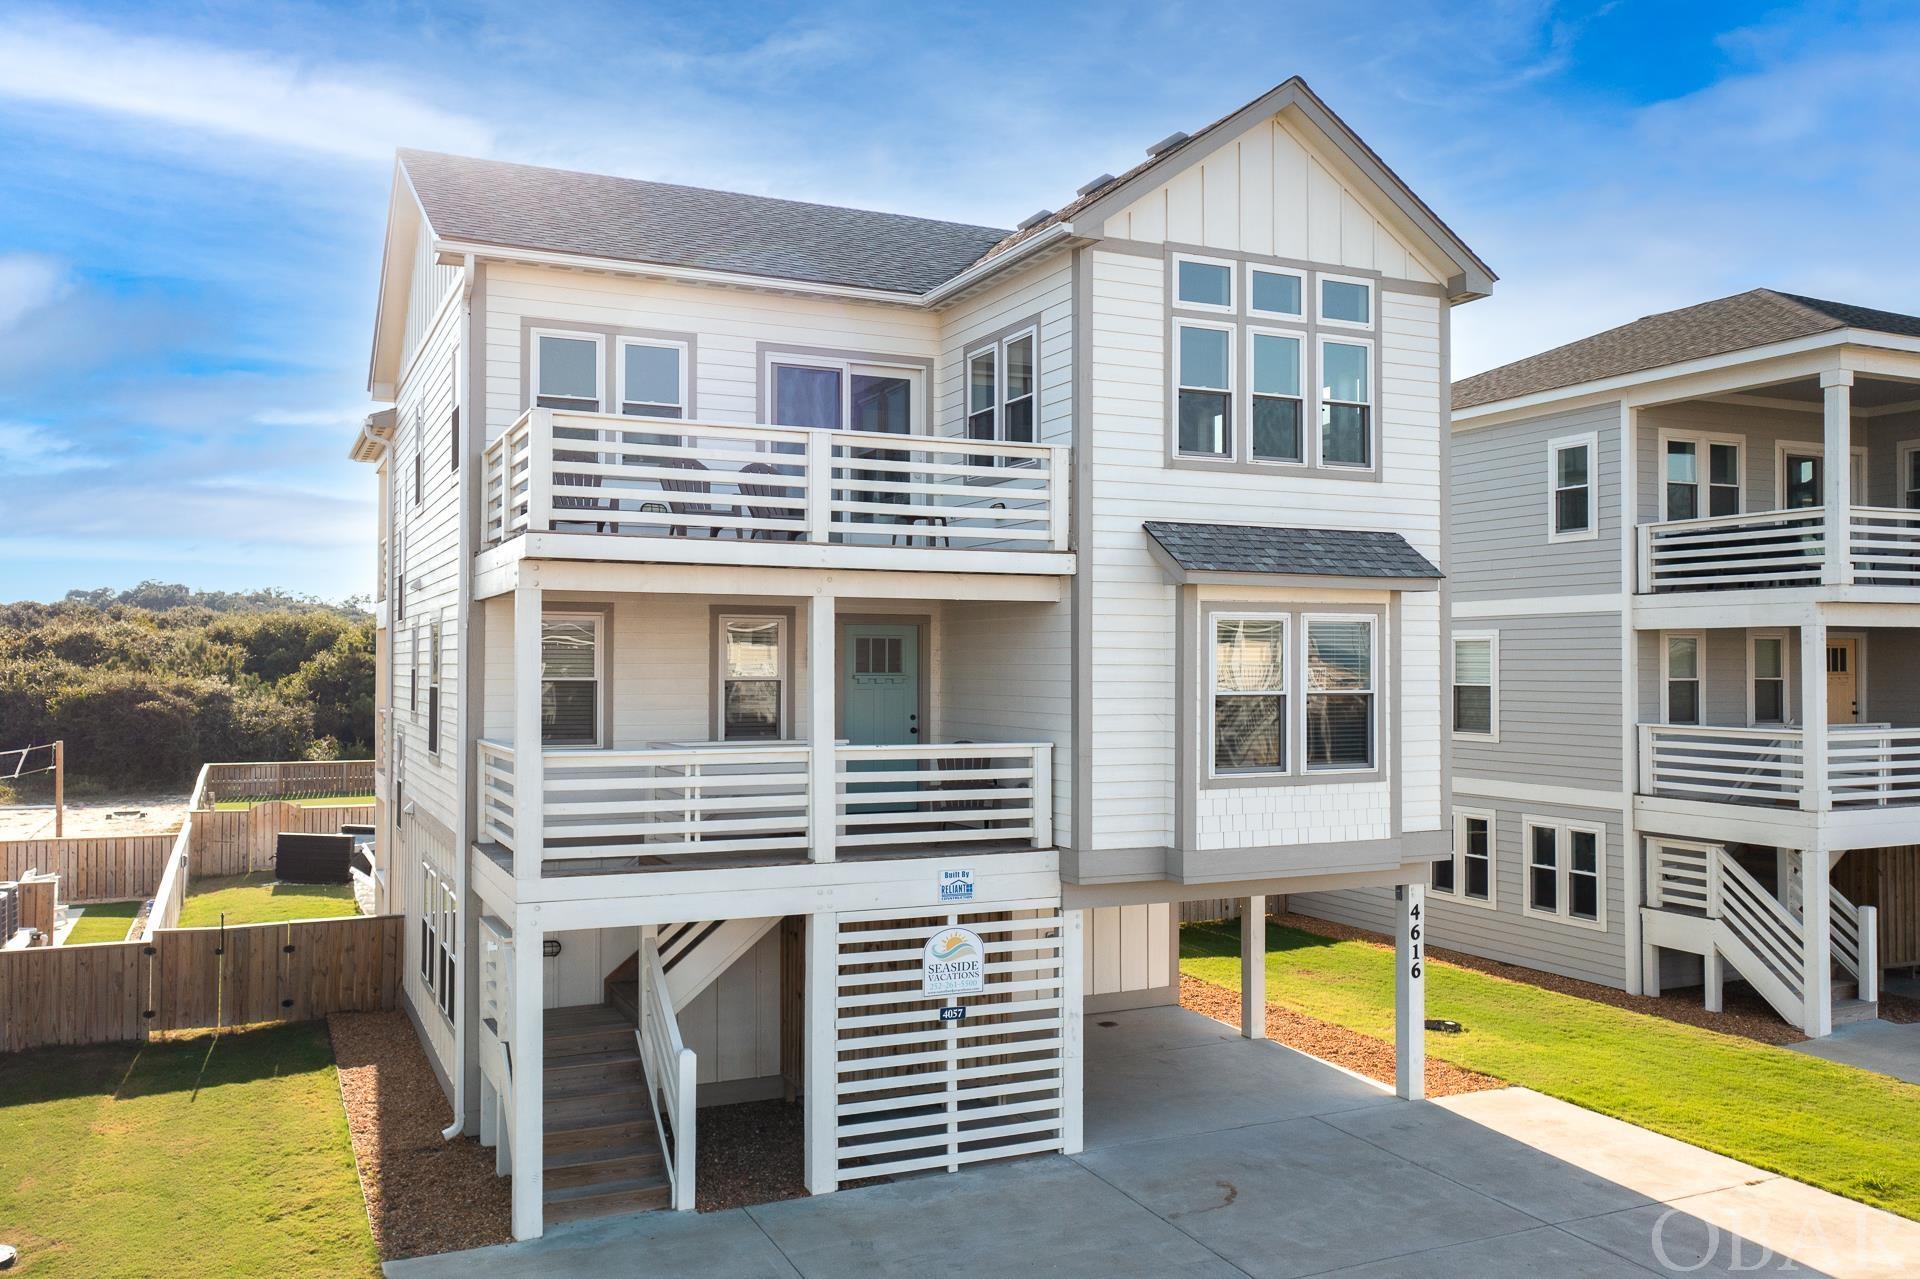 Can't beat location with impressive income in the heart of Kitty Hawk on the Outer Banks. This 6 bed 6.5 bath rental home, built in 2019, is just steps from the beach with great ocean views from the top living level and room for the whole family to enjoy with a spacious layout and vaulted ceilings. Kitchen features stainless steal appliances, quartz counters and able seating. Primary King suite is located on the top level with an additional four bedroom w/ ensuite on the mid level. Game-room w/ pool table, wet bar and flat screen tv, sixth bedroom and additional sitting room with pull out sofa are all located of the first floor. Ground floor also features elevator access, carport, 16’x16’ Private Pool, outdoor patio area w/ bluetooth-enabled smart TV, hot Tub, fenced yard.